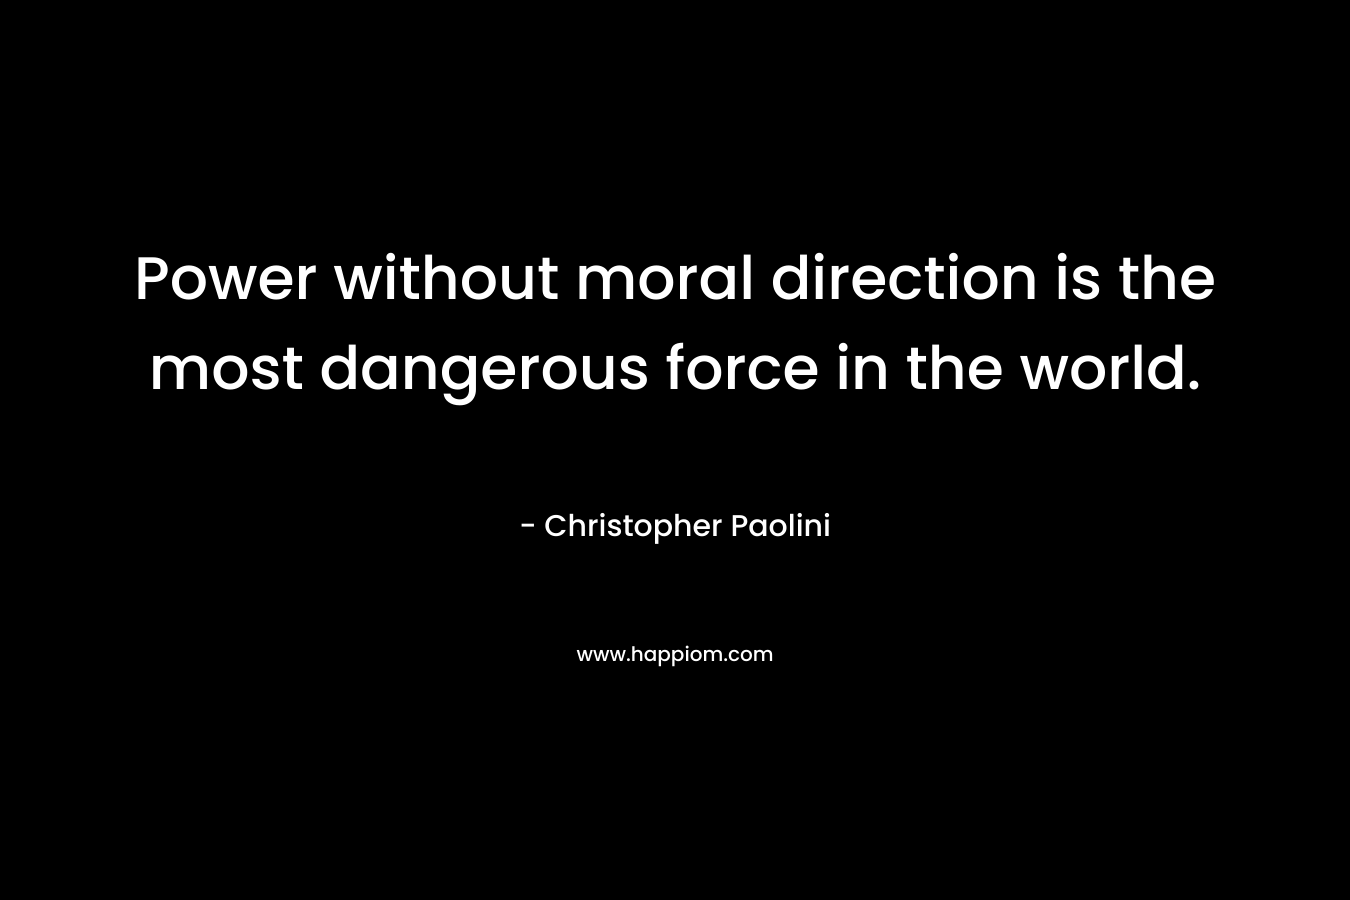 Power without moral direction is the most dangerous force in the world.